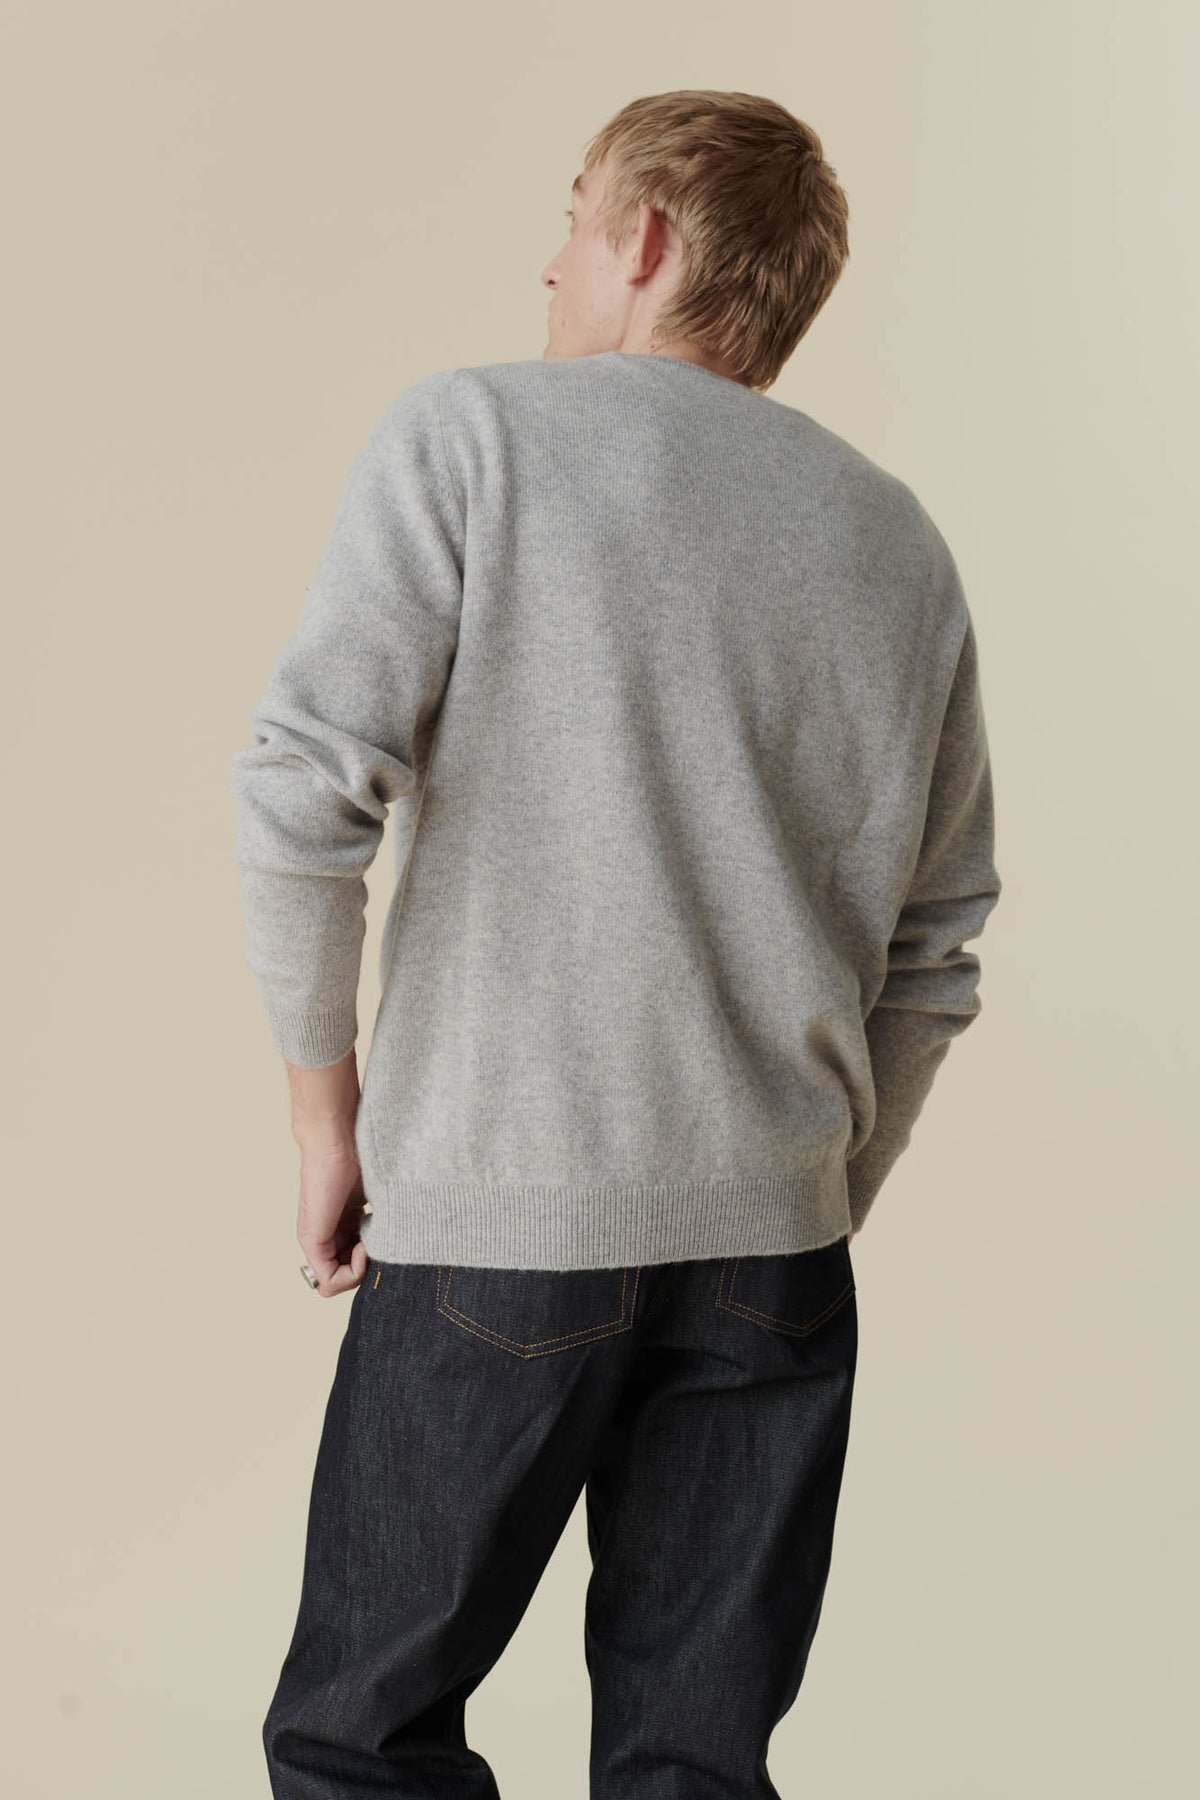 
            the back of white male, knee up, wearing lambswool crew neck in light grey